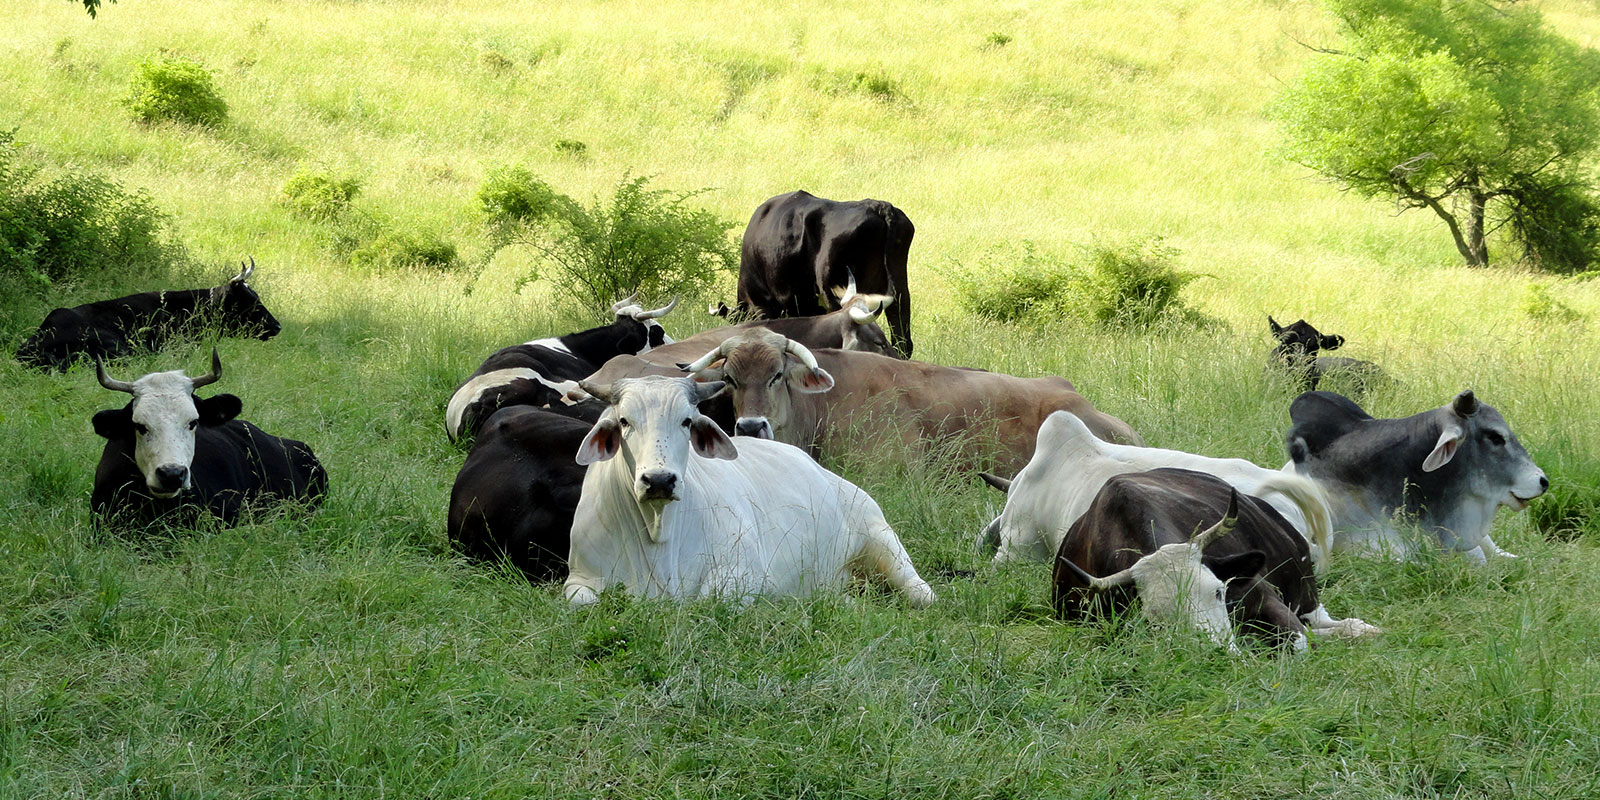 ISCOWP herd relax in the shade